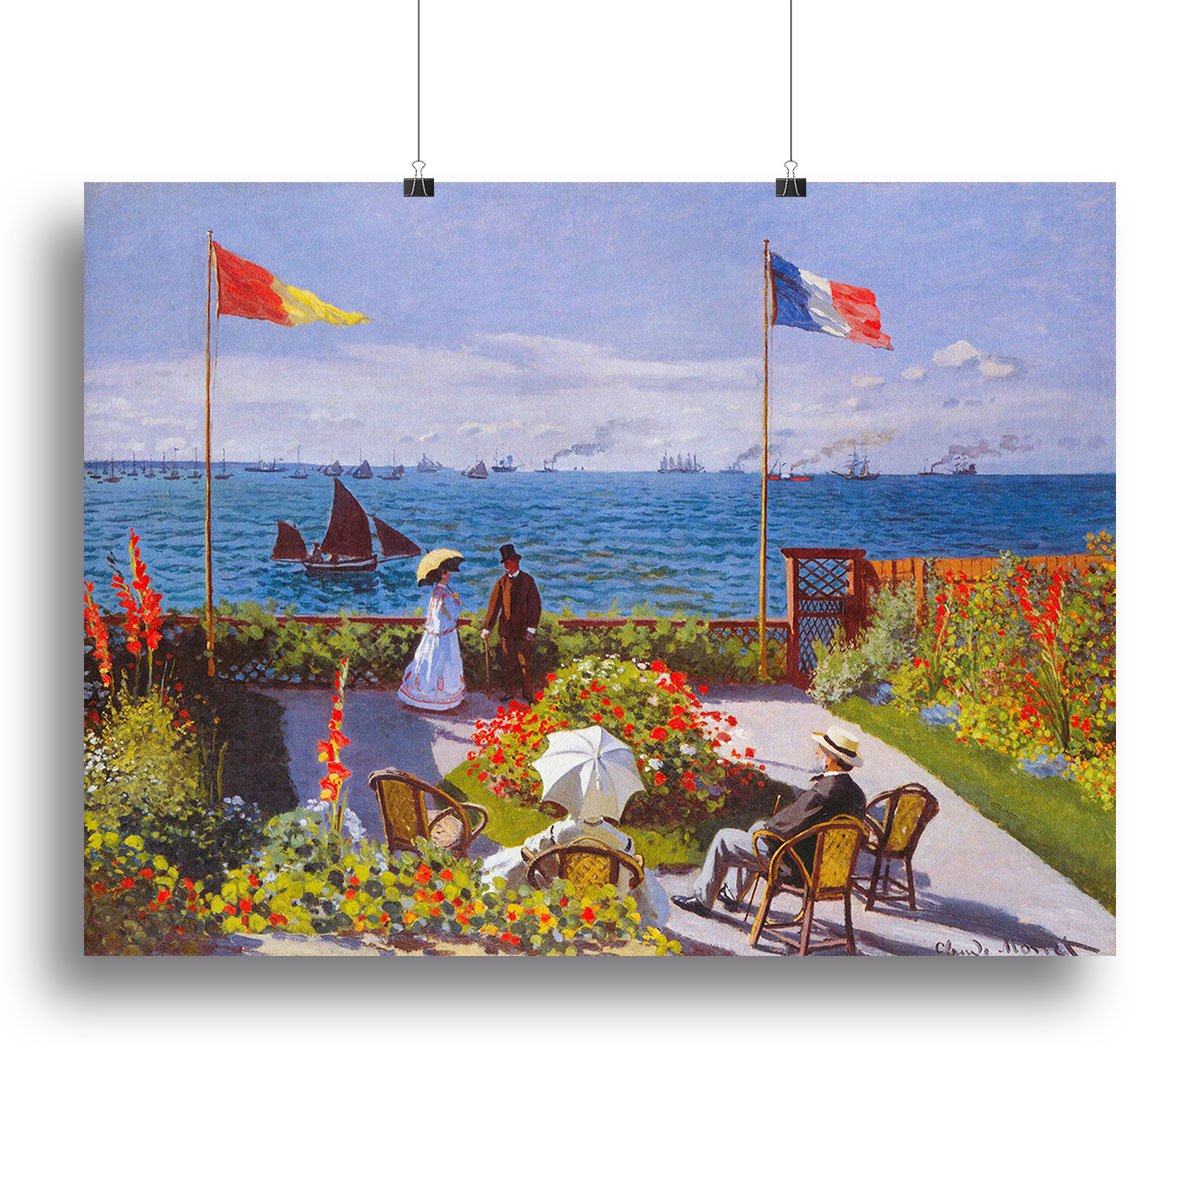 Garden at Sainte Adresse 2 by Monet Canvas Print or Poster